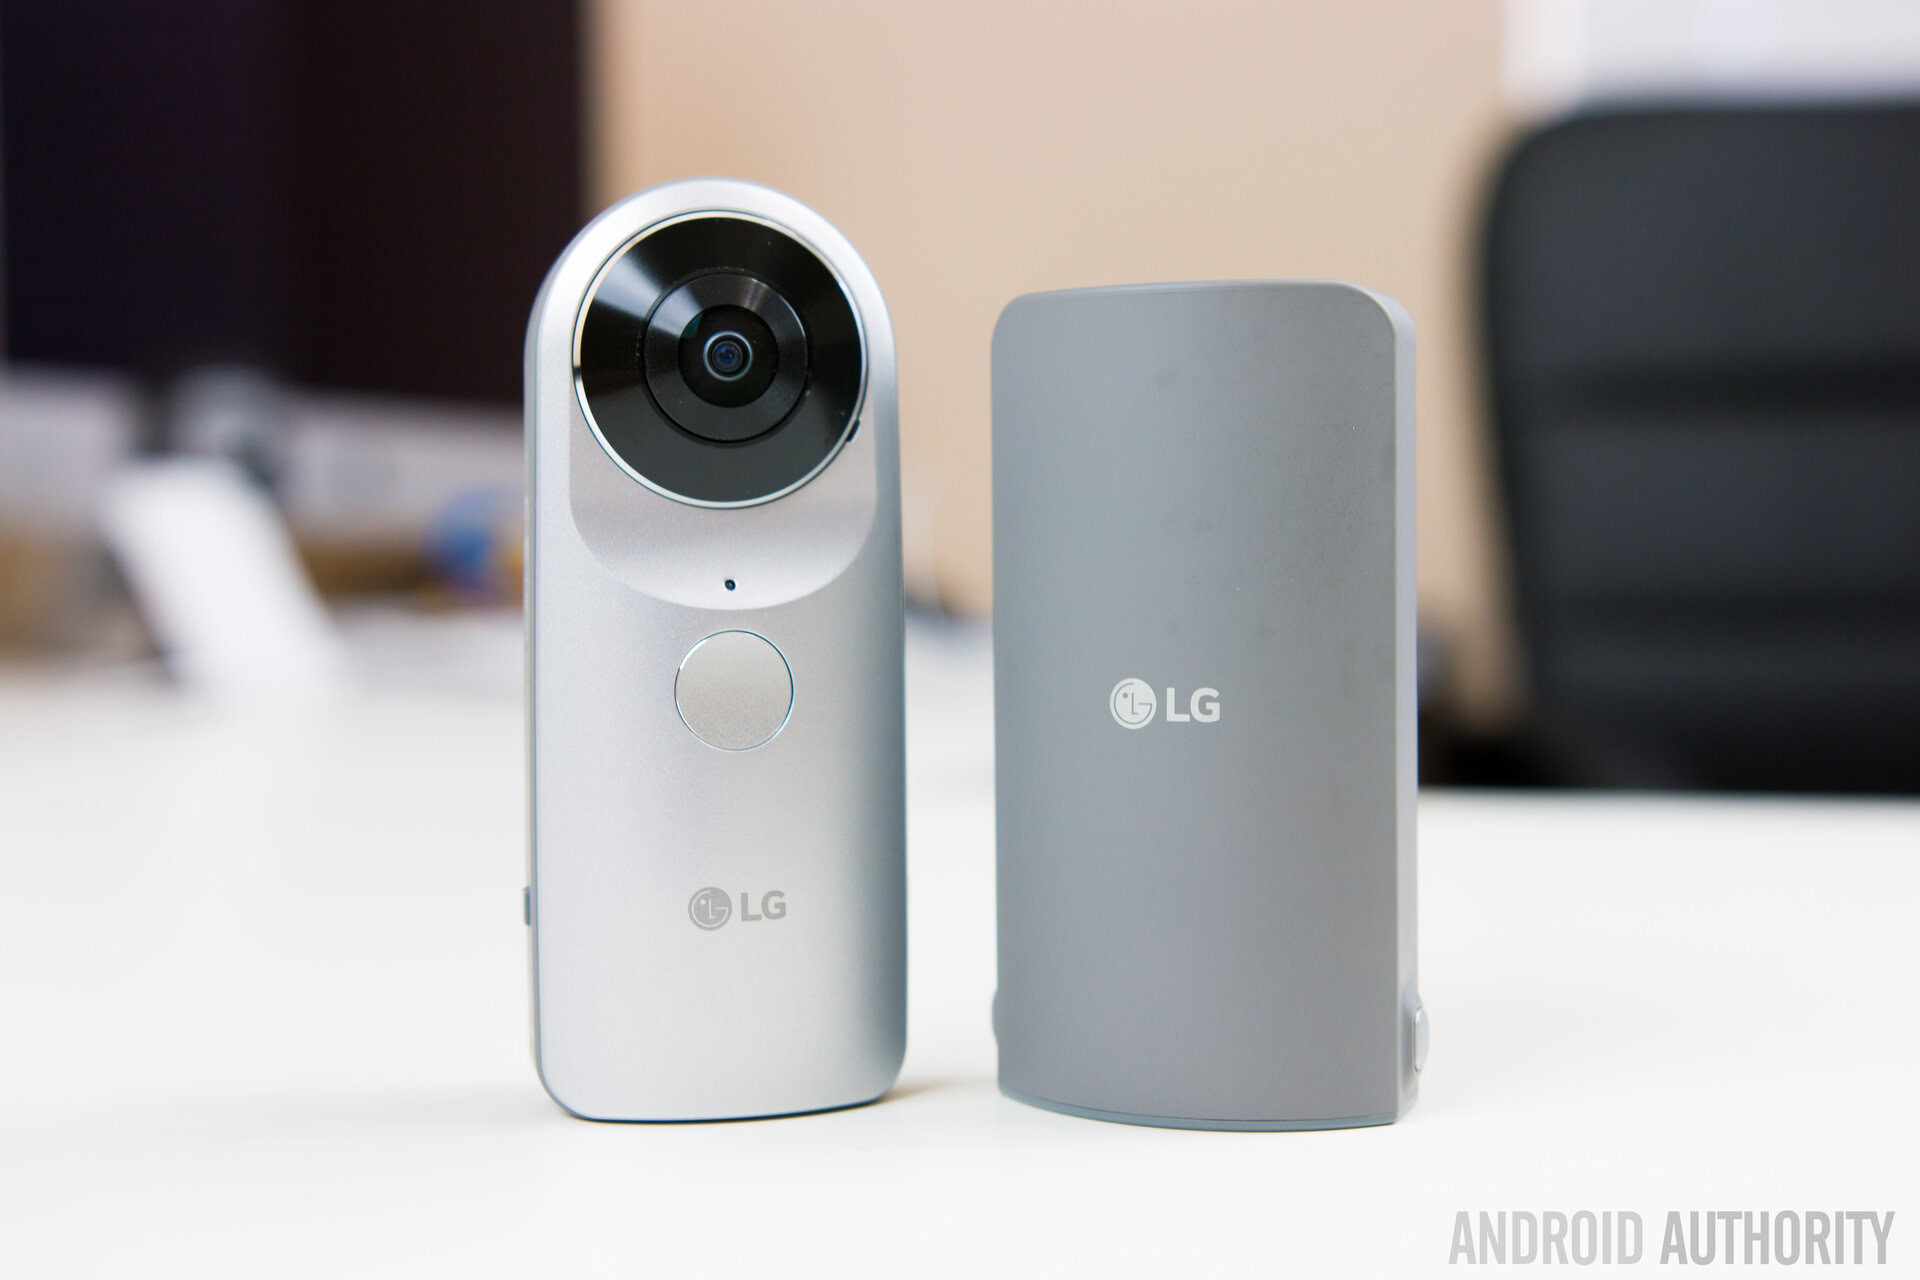 LG G5 Full Specification, Price and Comparison - Gizmochina